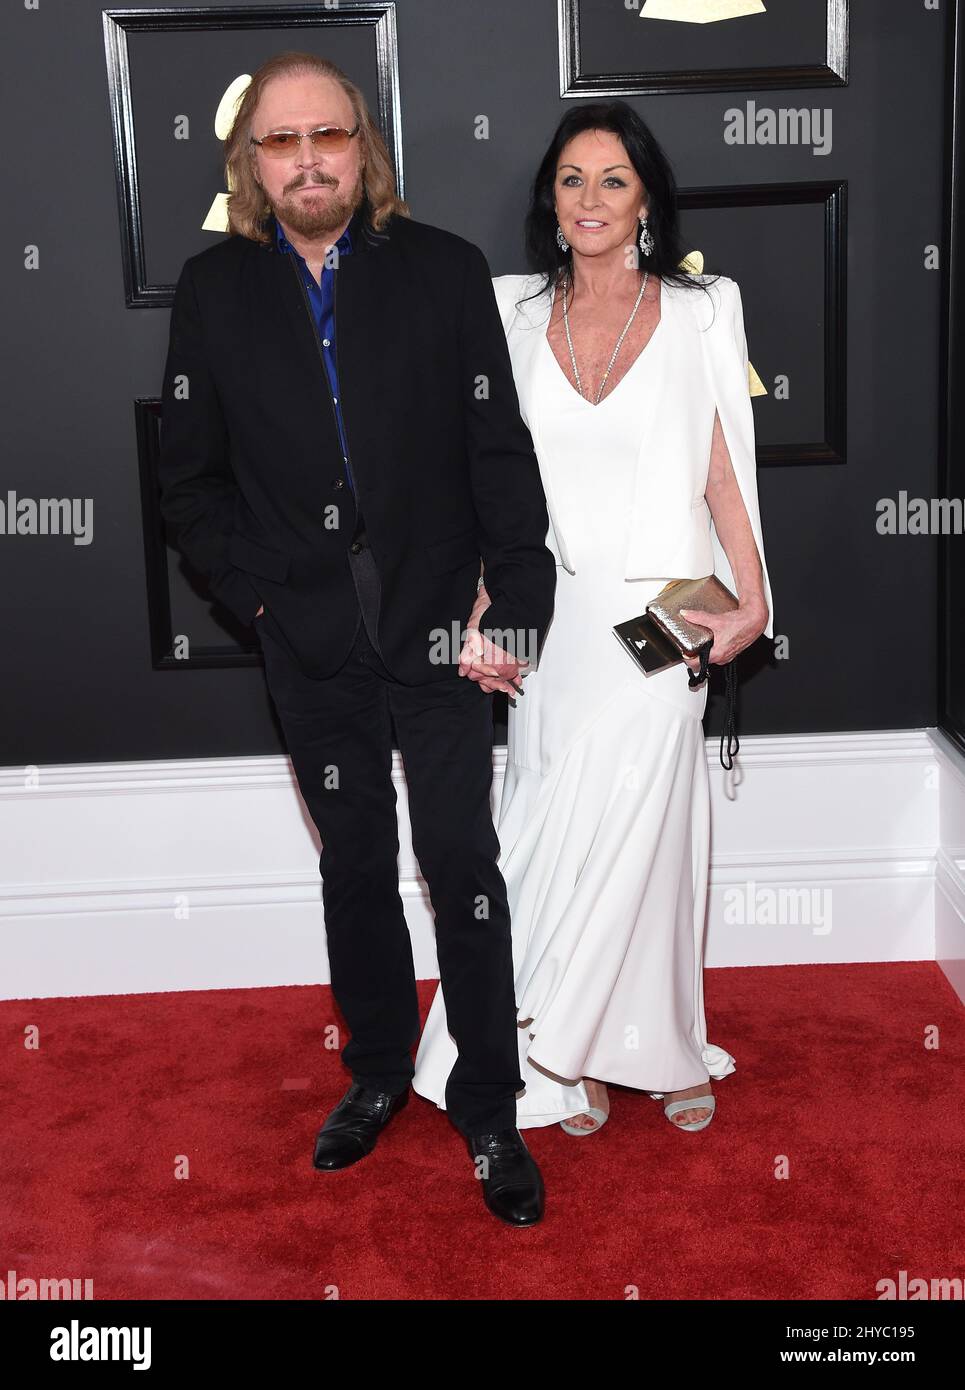 Barry Gibb attending the 59th Annual Grammy Awards in Los Angeles Stock Photo